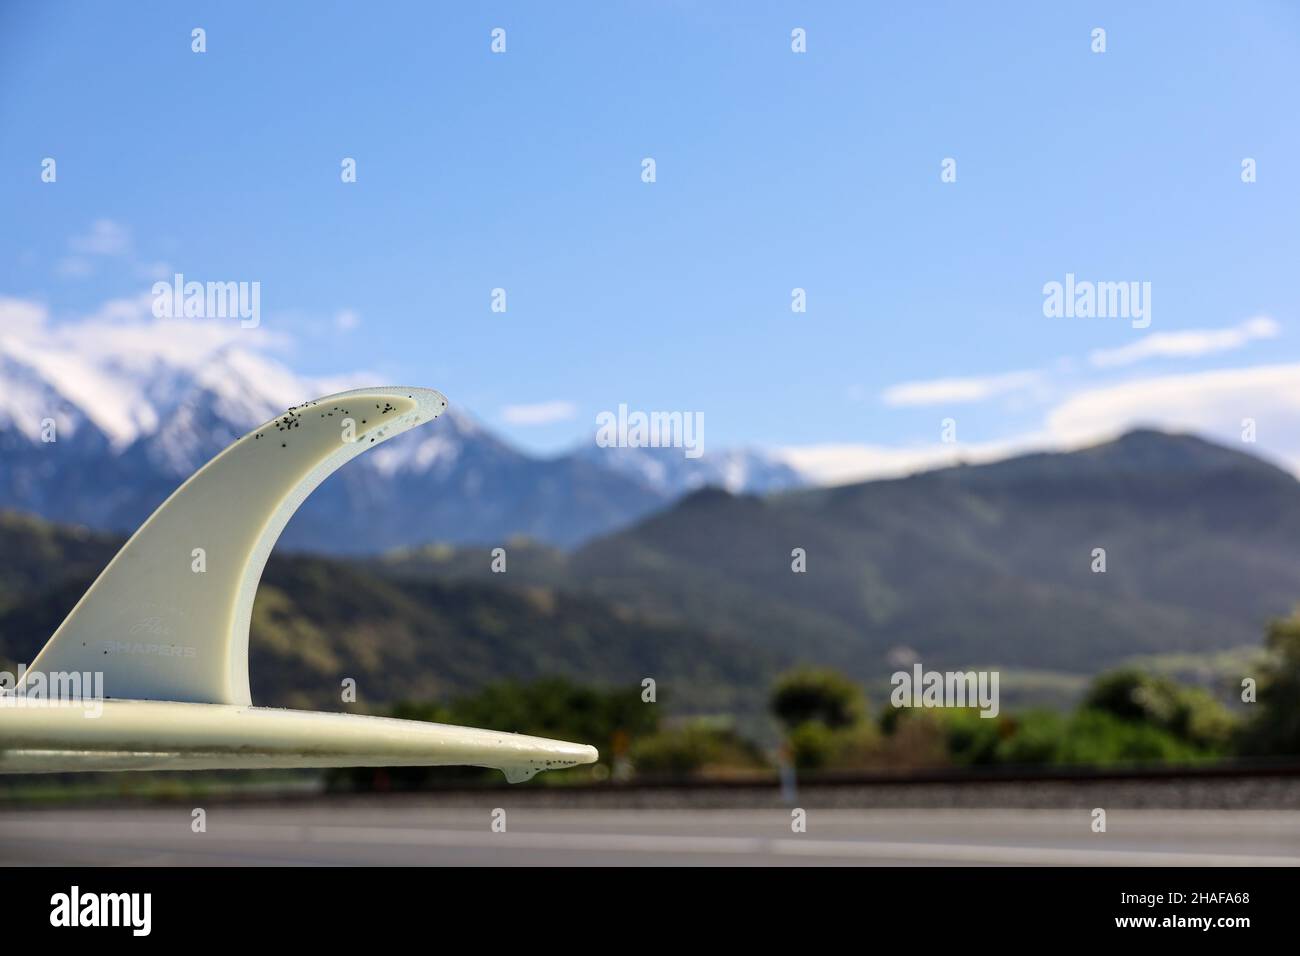 Surfboard on roof of car in mountains Stock Photo